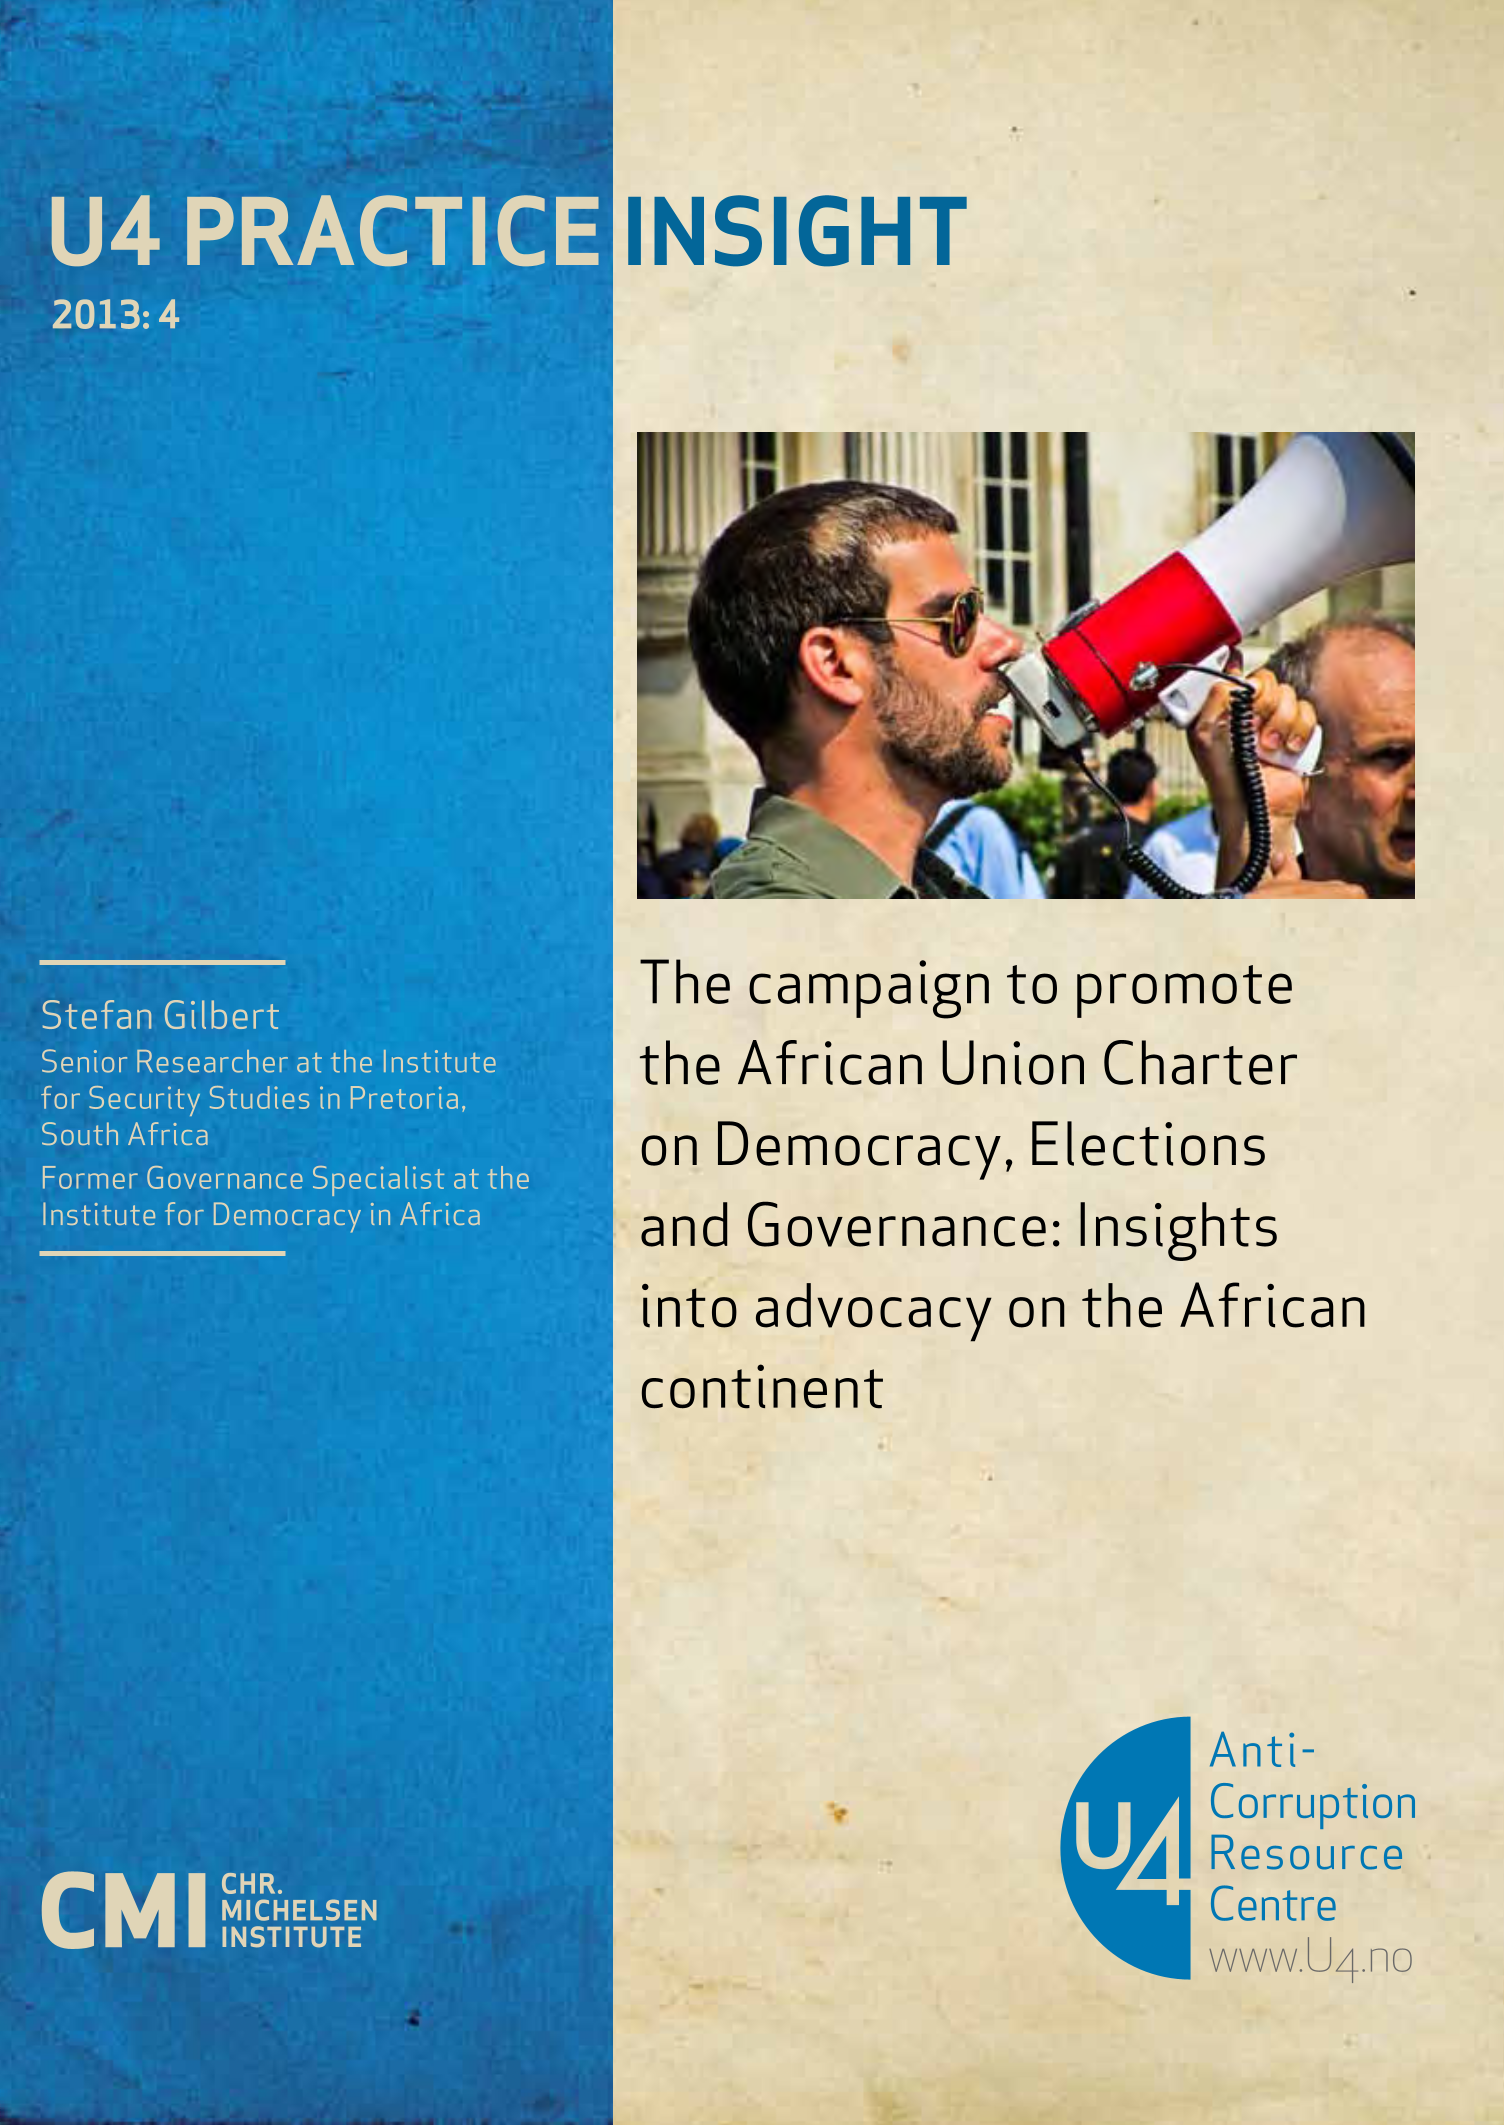 The campaign to promote the African Union Charter on Democracy, Elections and Governance: Insights into advocacy on the African continent